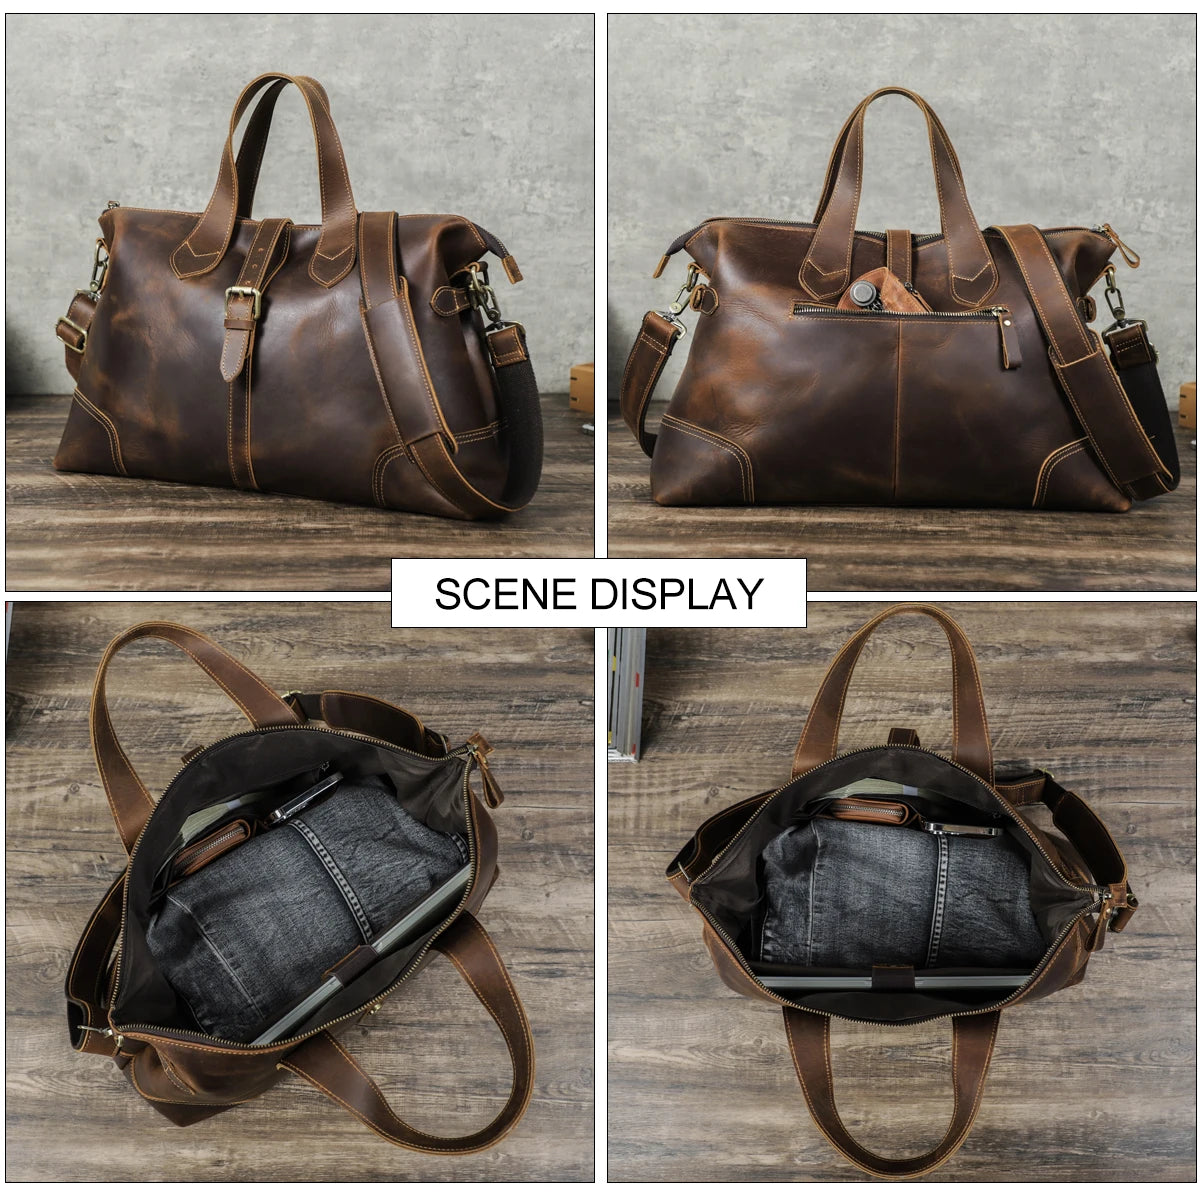 Contact's Men Crazy Horse Leather Travel Bag Multifunctional Business Casual Luggage Bag Large Capacity Vintage Tote Handbags